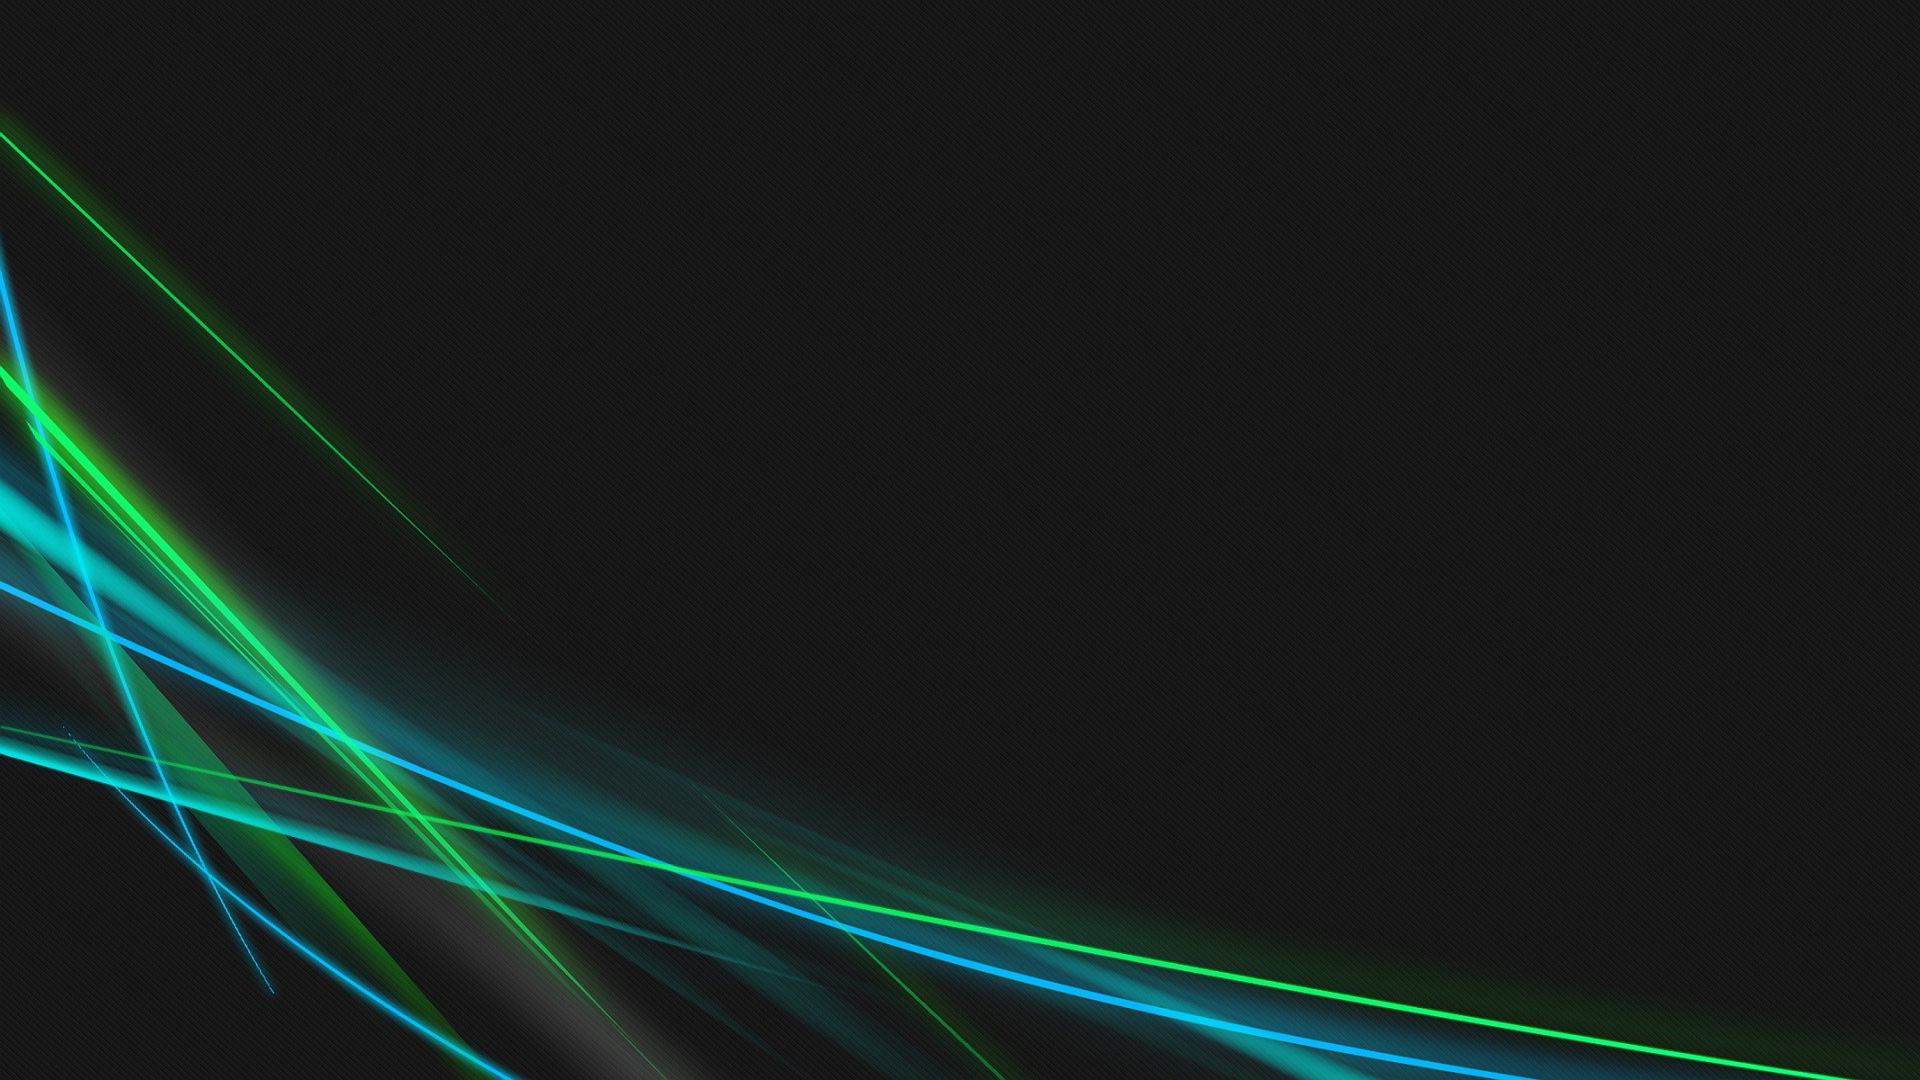 Blue And Green Neon Curves Wallpaper - Abstract Blue Green Black -  1920x1080 Wallpaper 